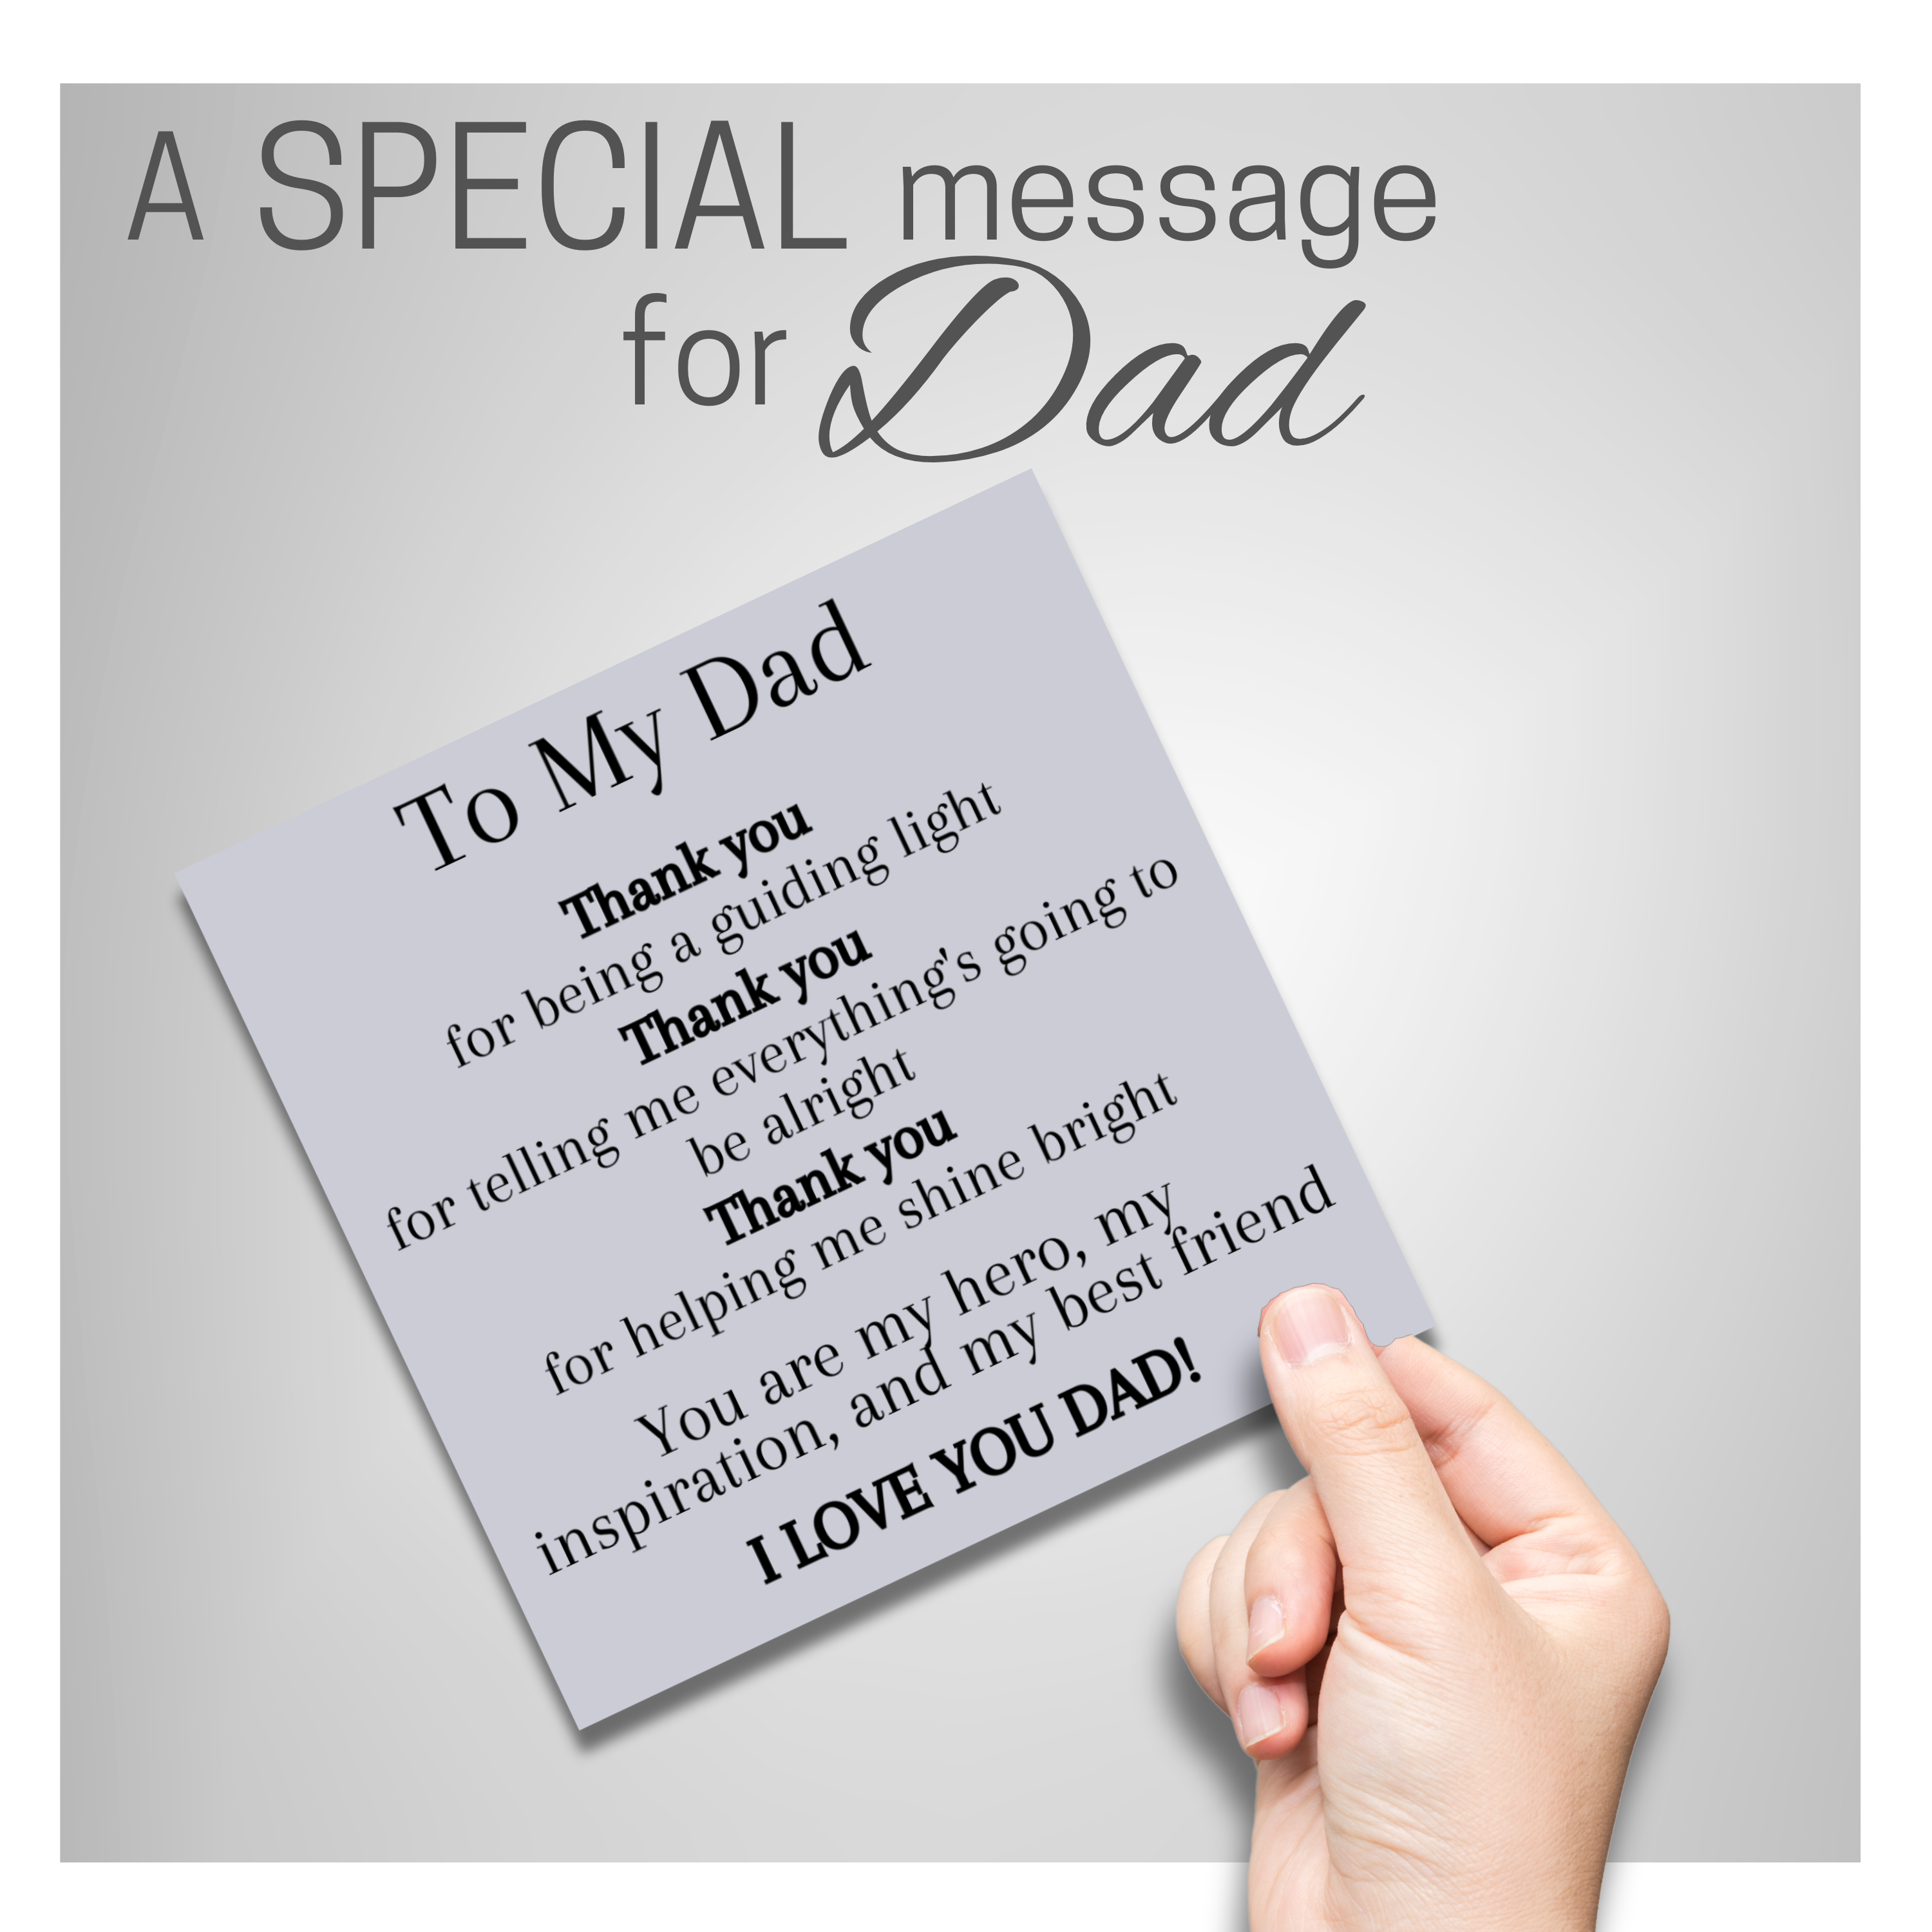 gift card for dad